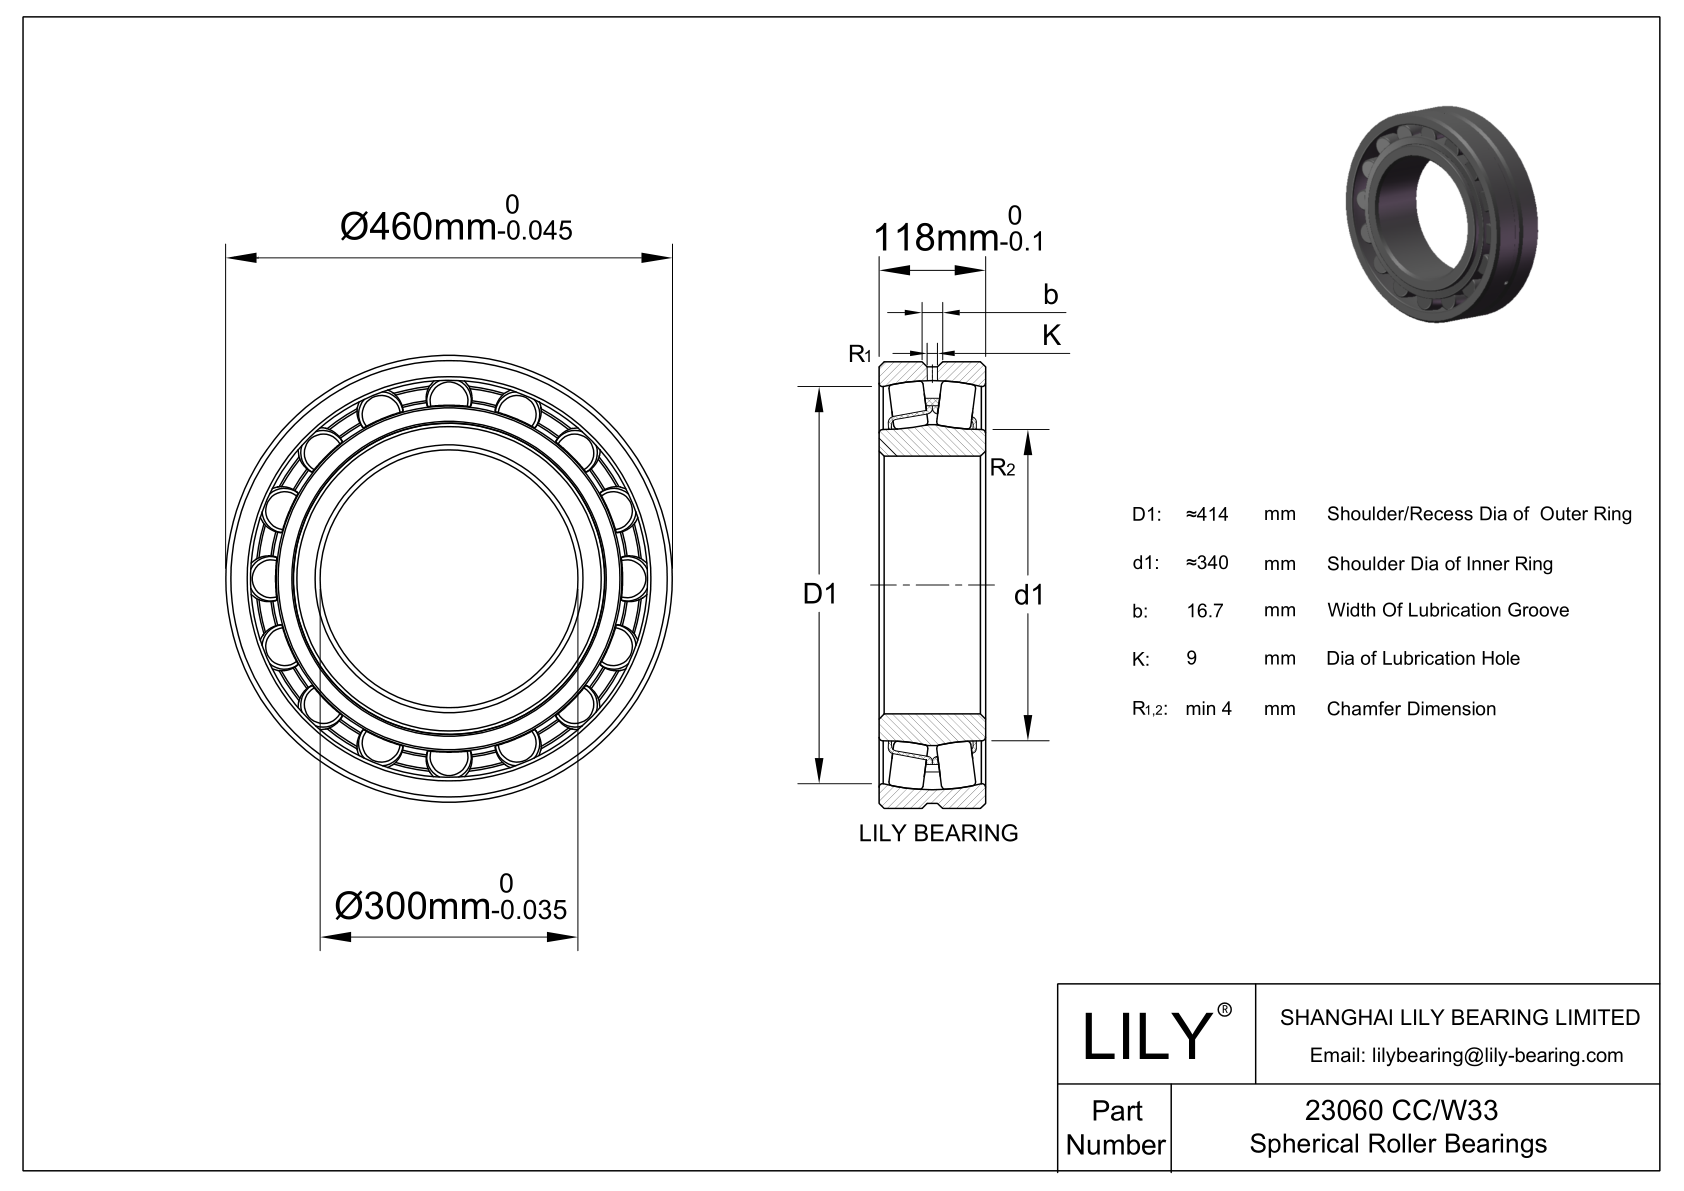 23060 CC/W33 Double Row Spherical Roller Bearing cad drawing